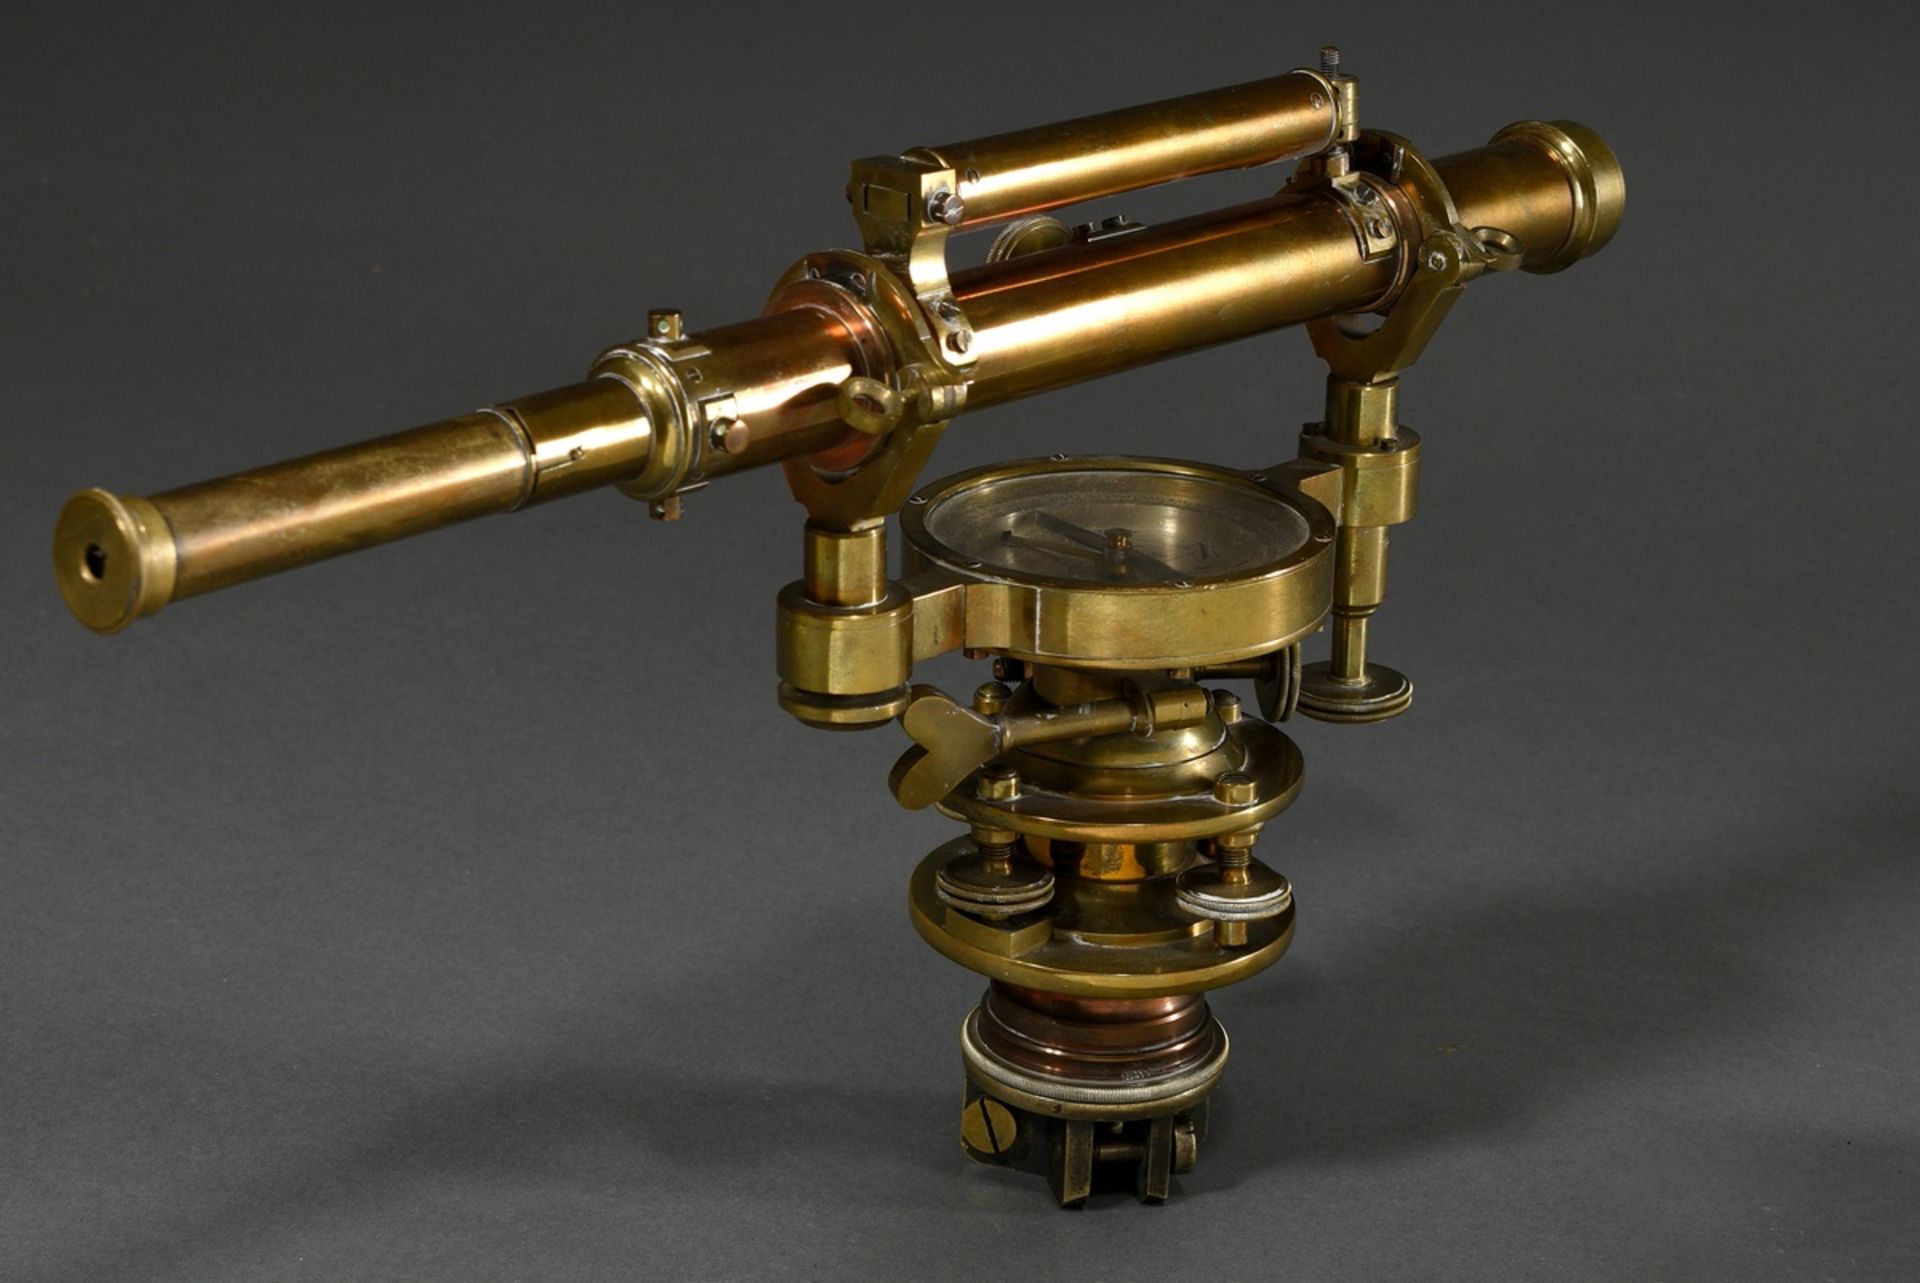 Surveying instrument resp. levelling device with compass "J. M. Hyde, Bristol", brass, 19th c., 24x - Image 2 of 5